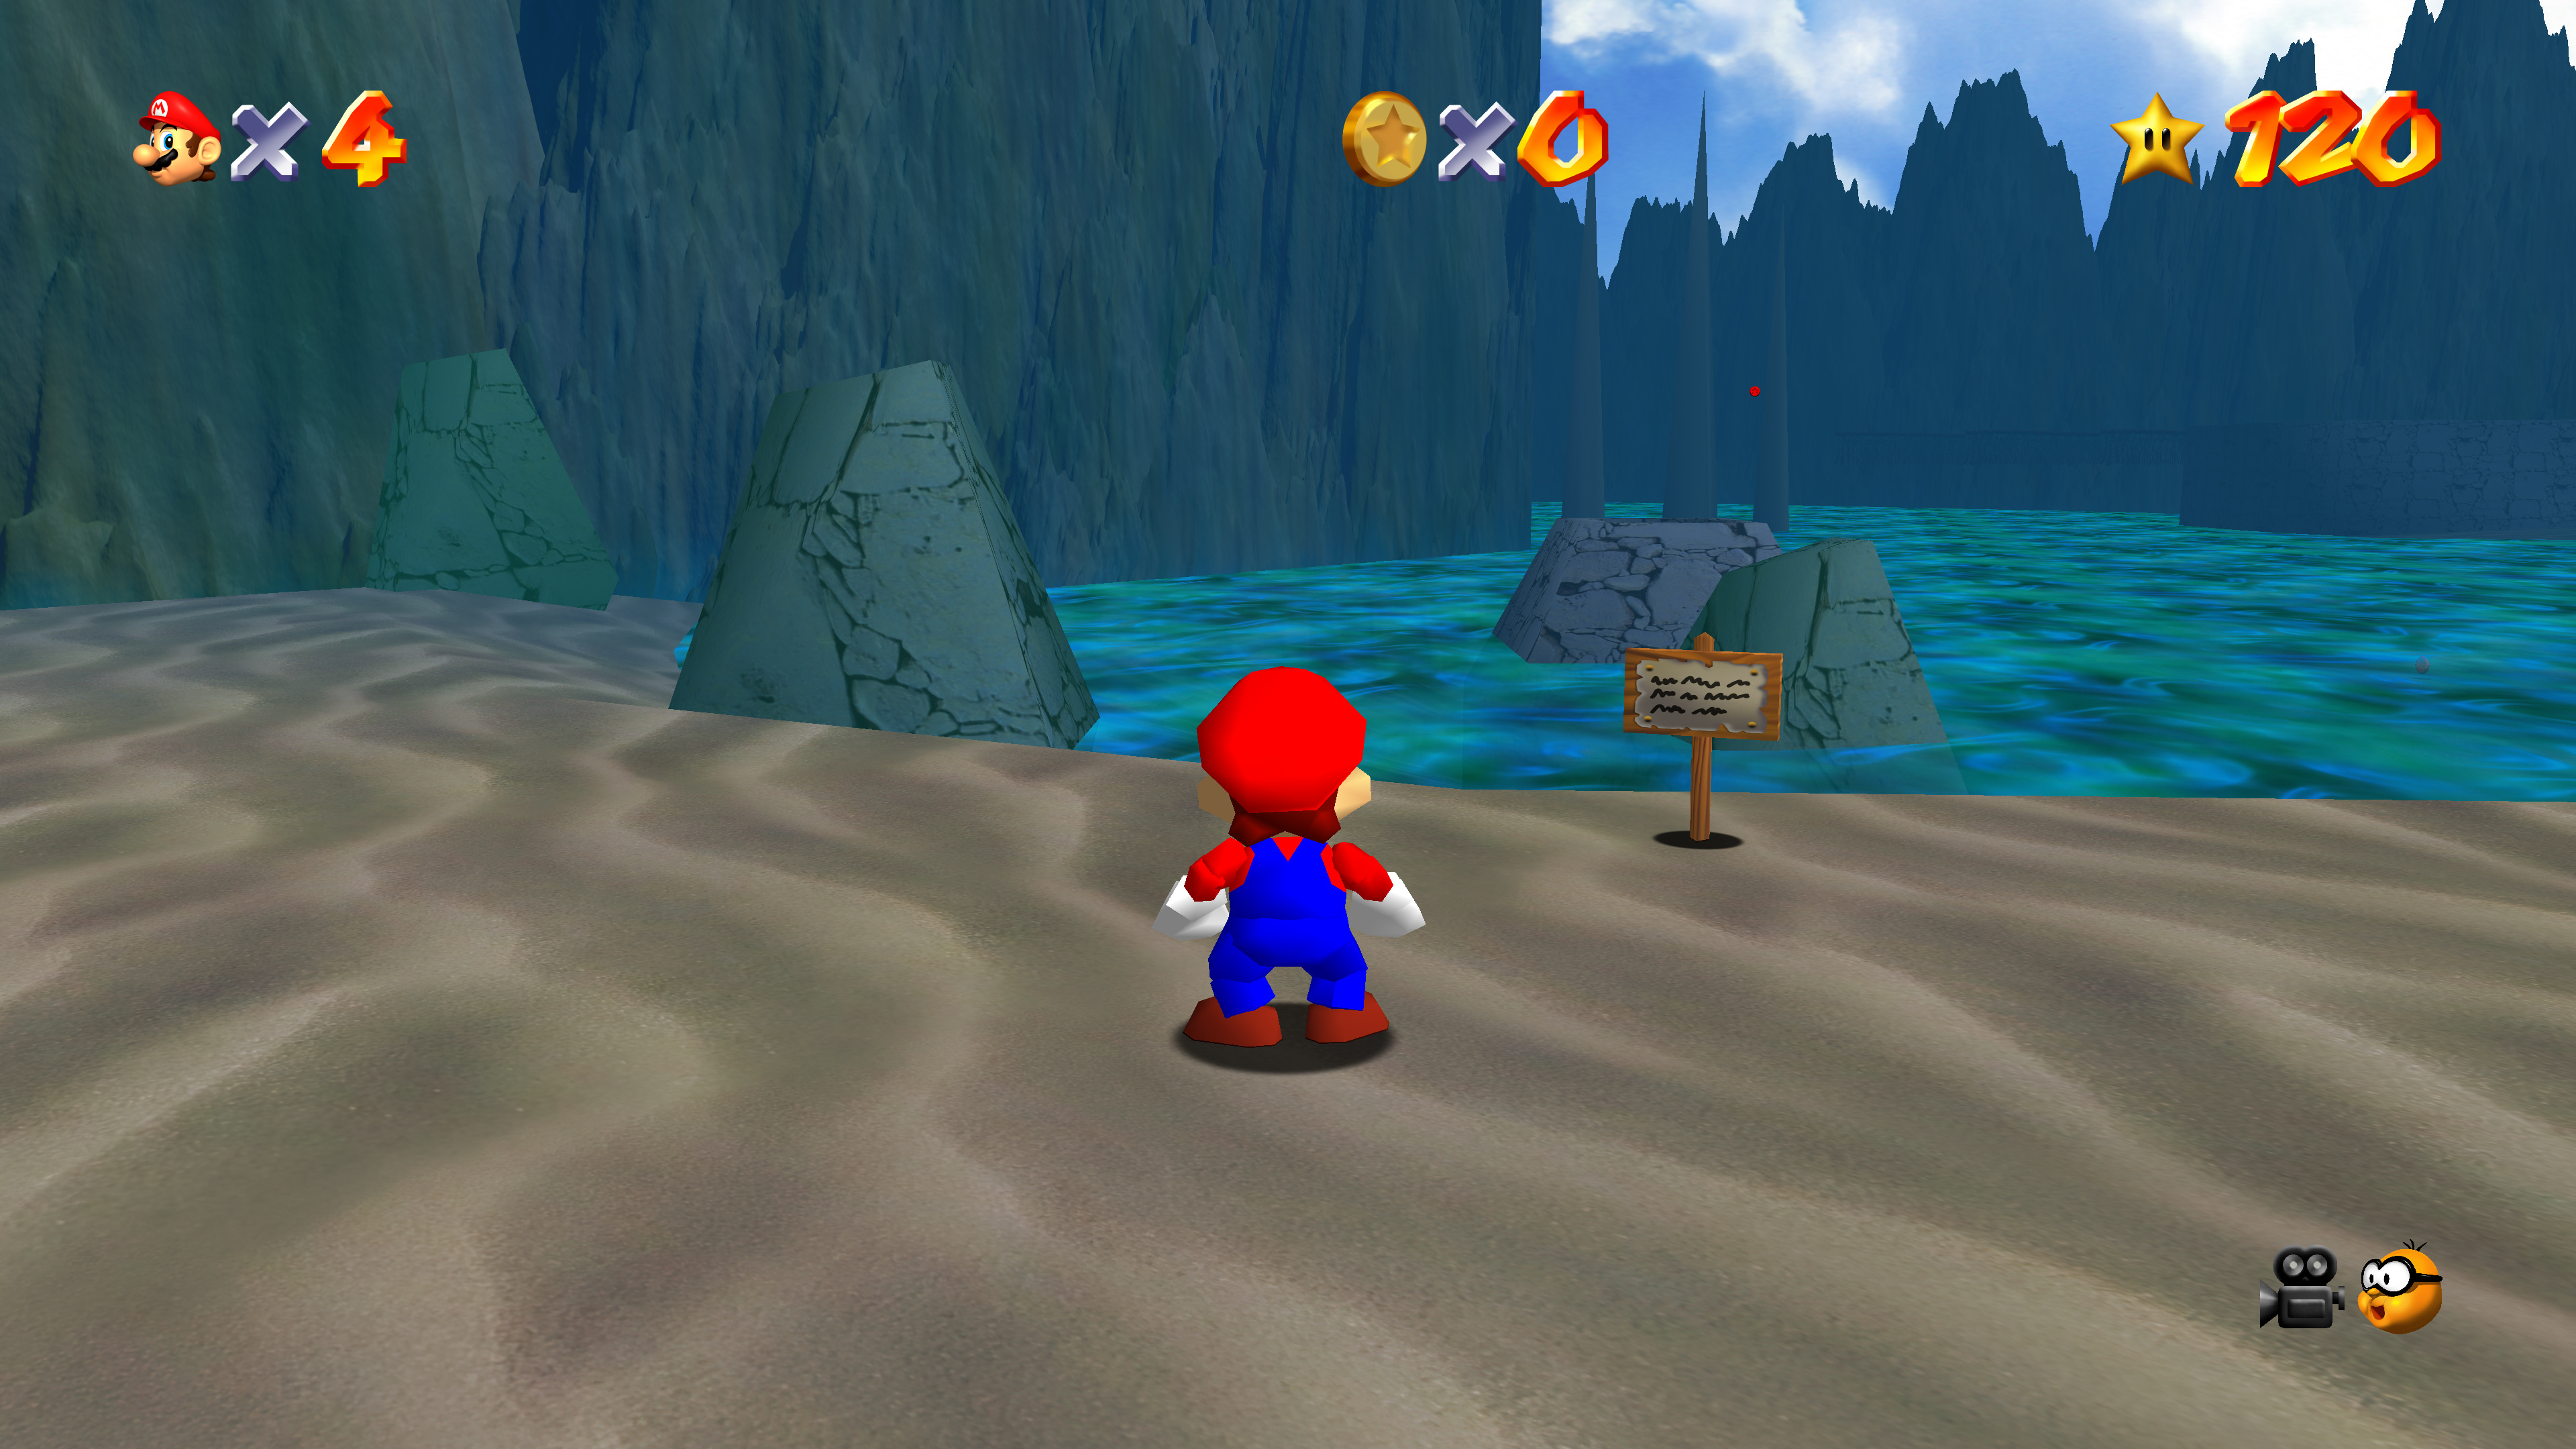 n64 texture packs with baked lighting